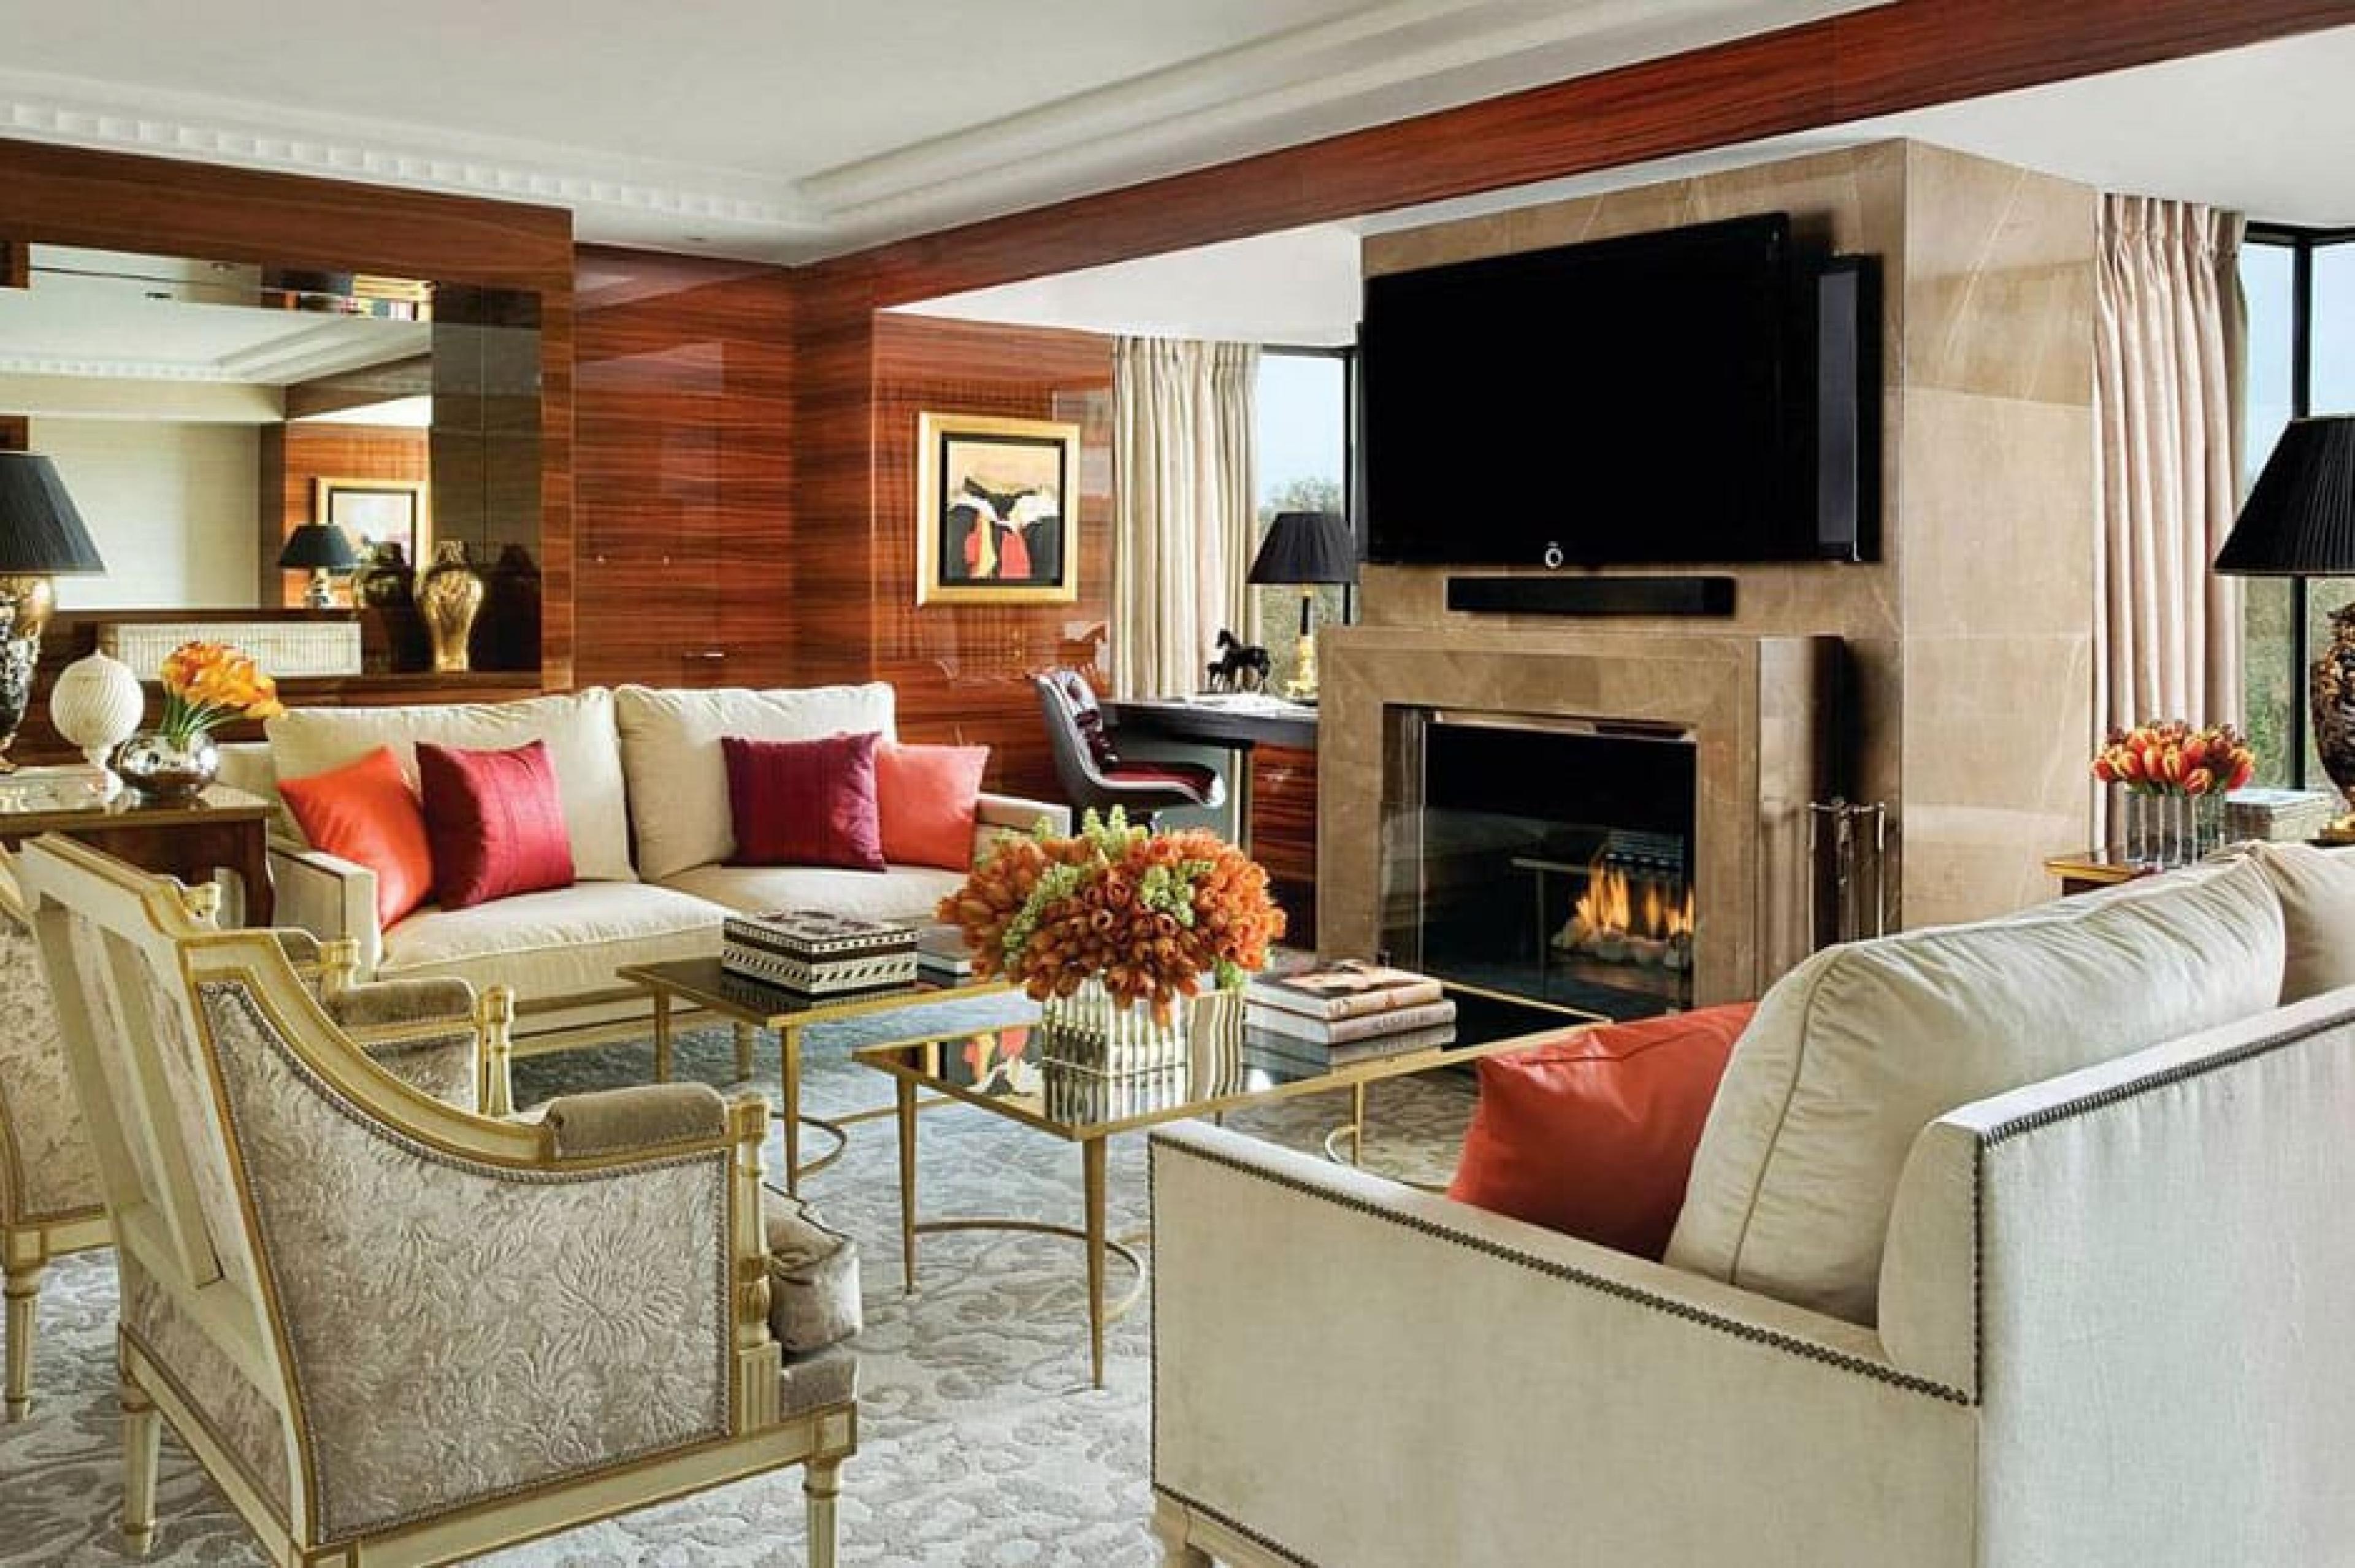 Fireplace in Living Room at Four Seasons Park Lane, London, England